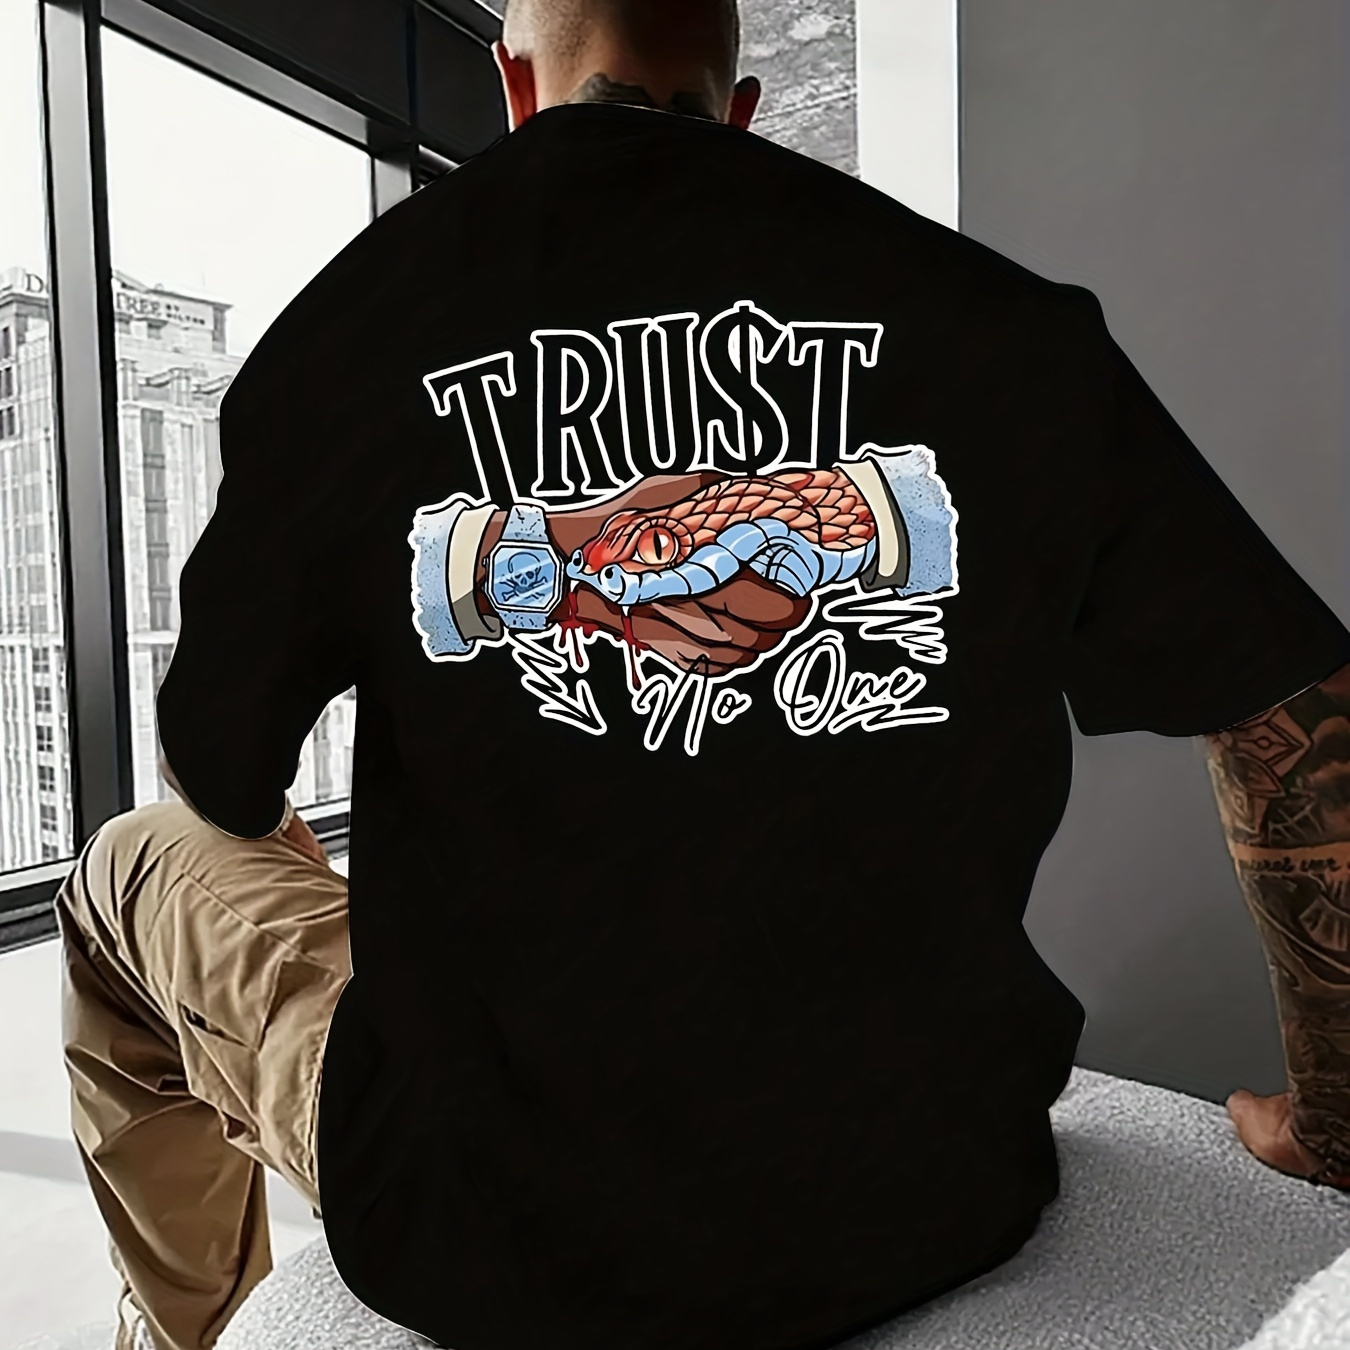 

Trust No 1 "creative Print Summer Casual T-shirt Short Sleeve For Men, Sporty Leisure Style, Fashion Crew Neck Top For Daily Wear